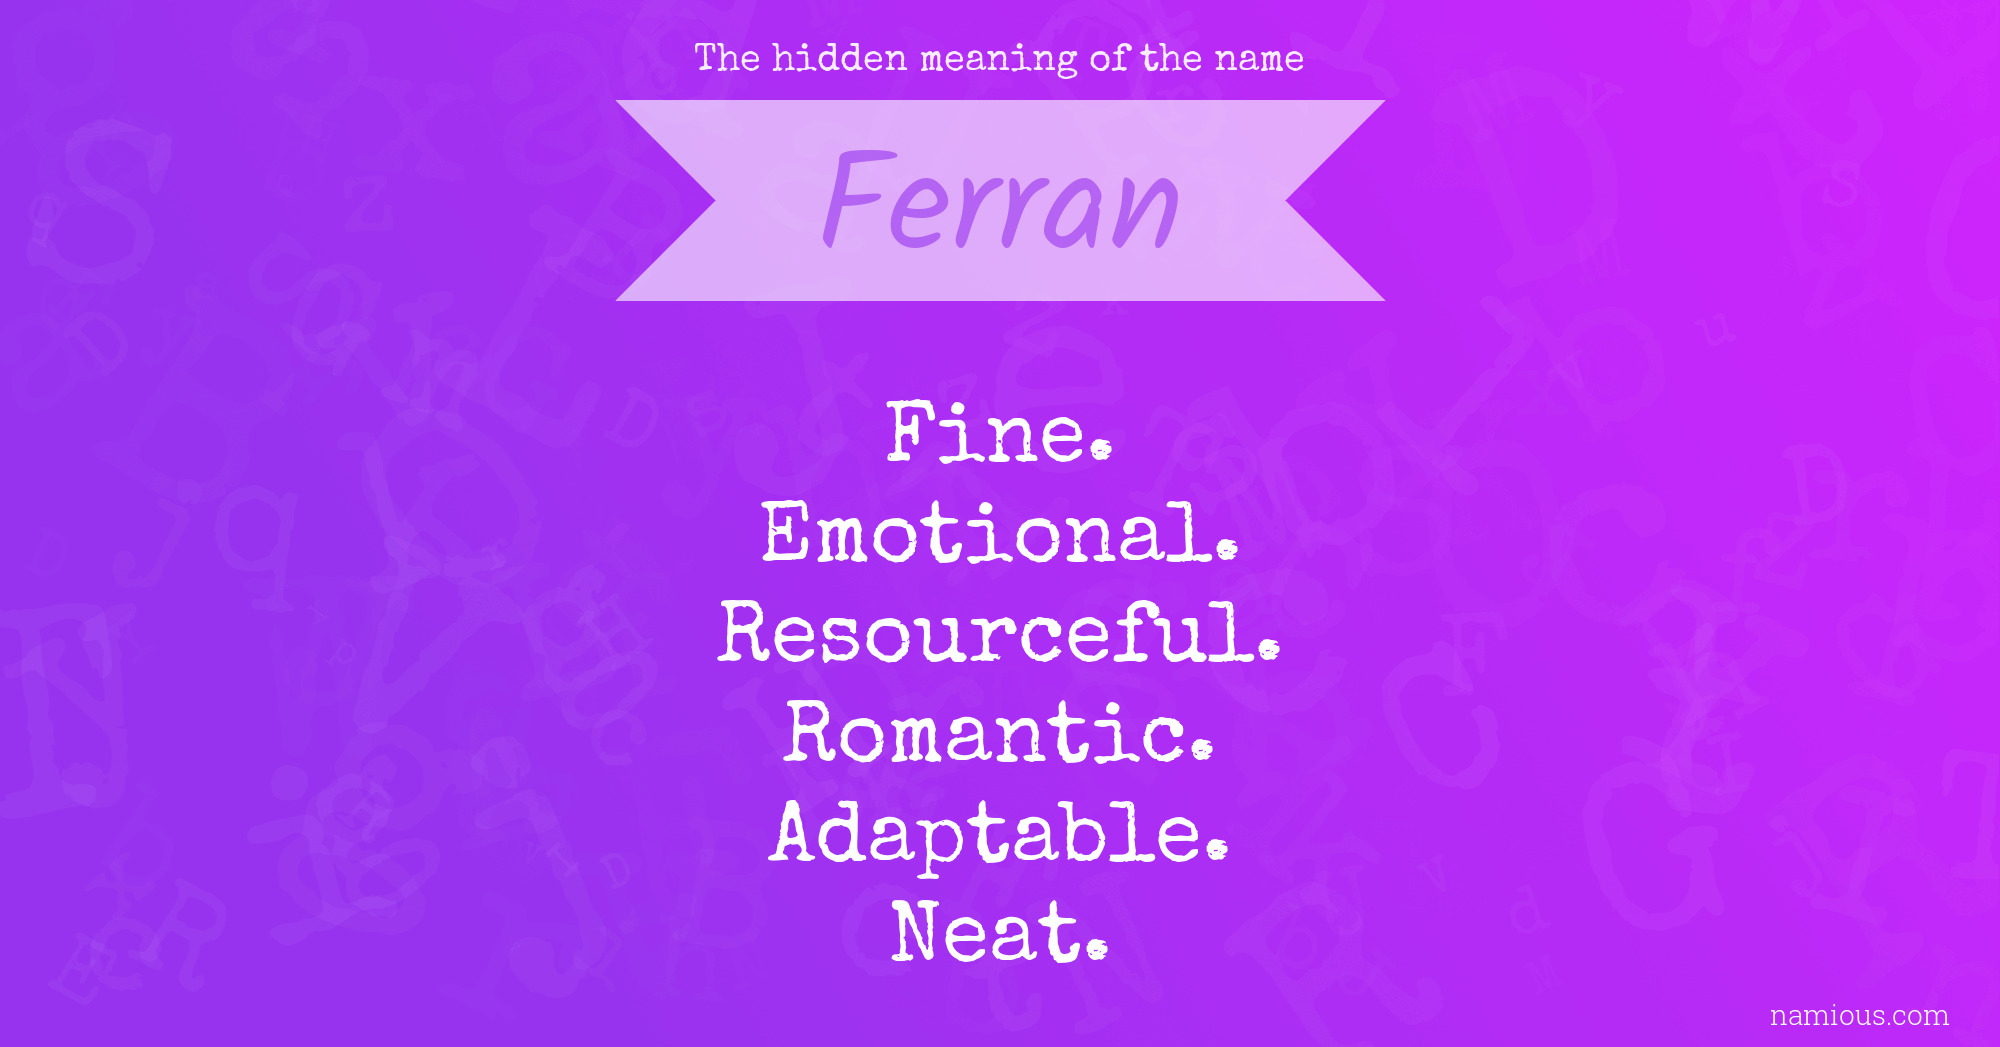 The hidden meaning of the name Ferran